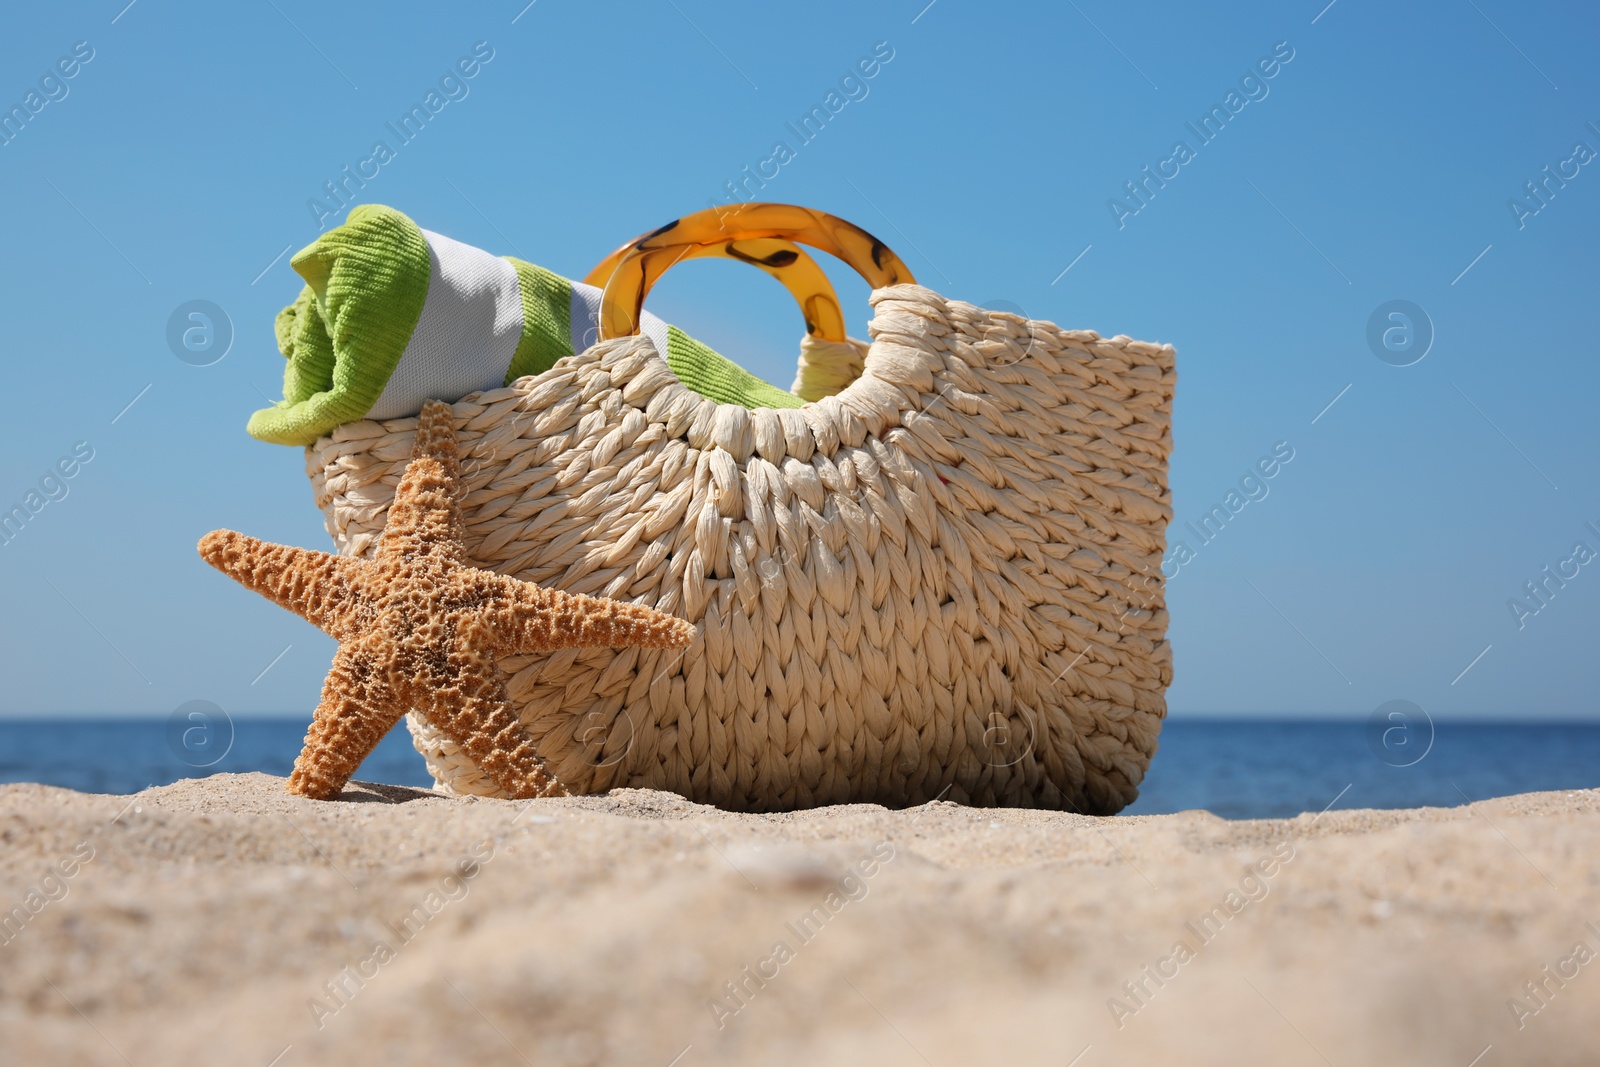 Photo of Bag with beach accessories on sand near sea